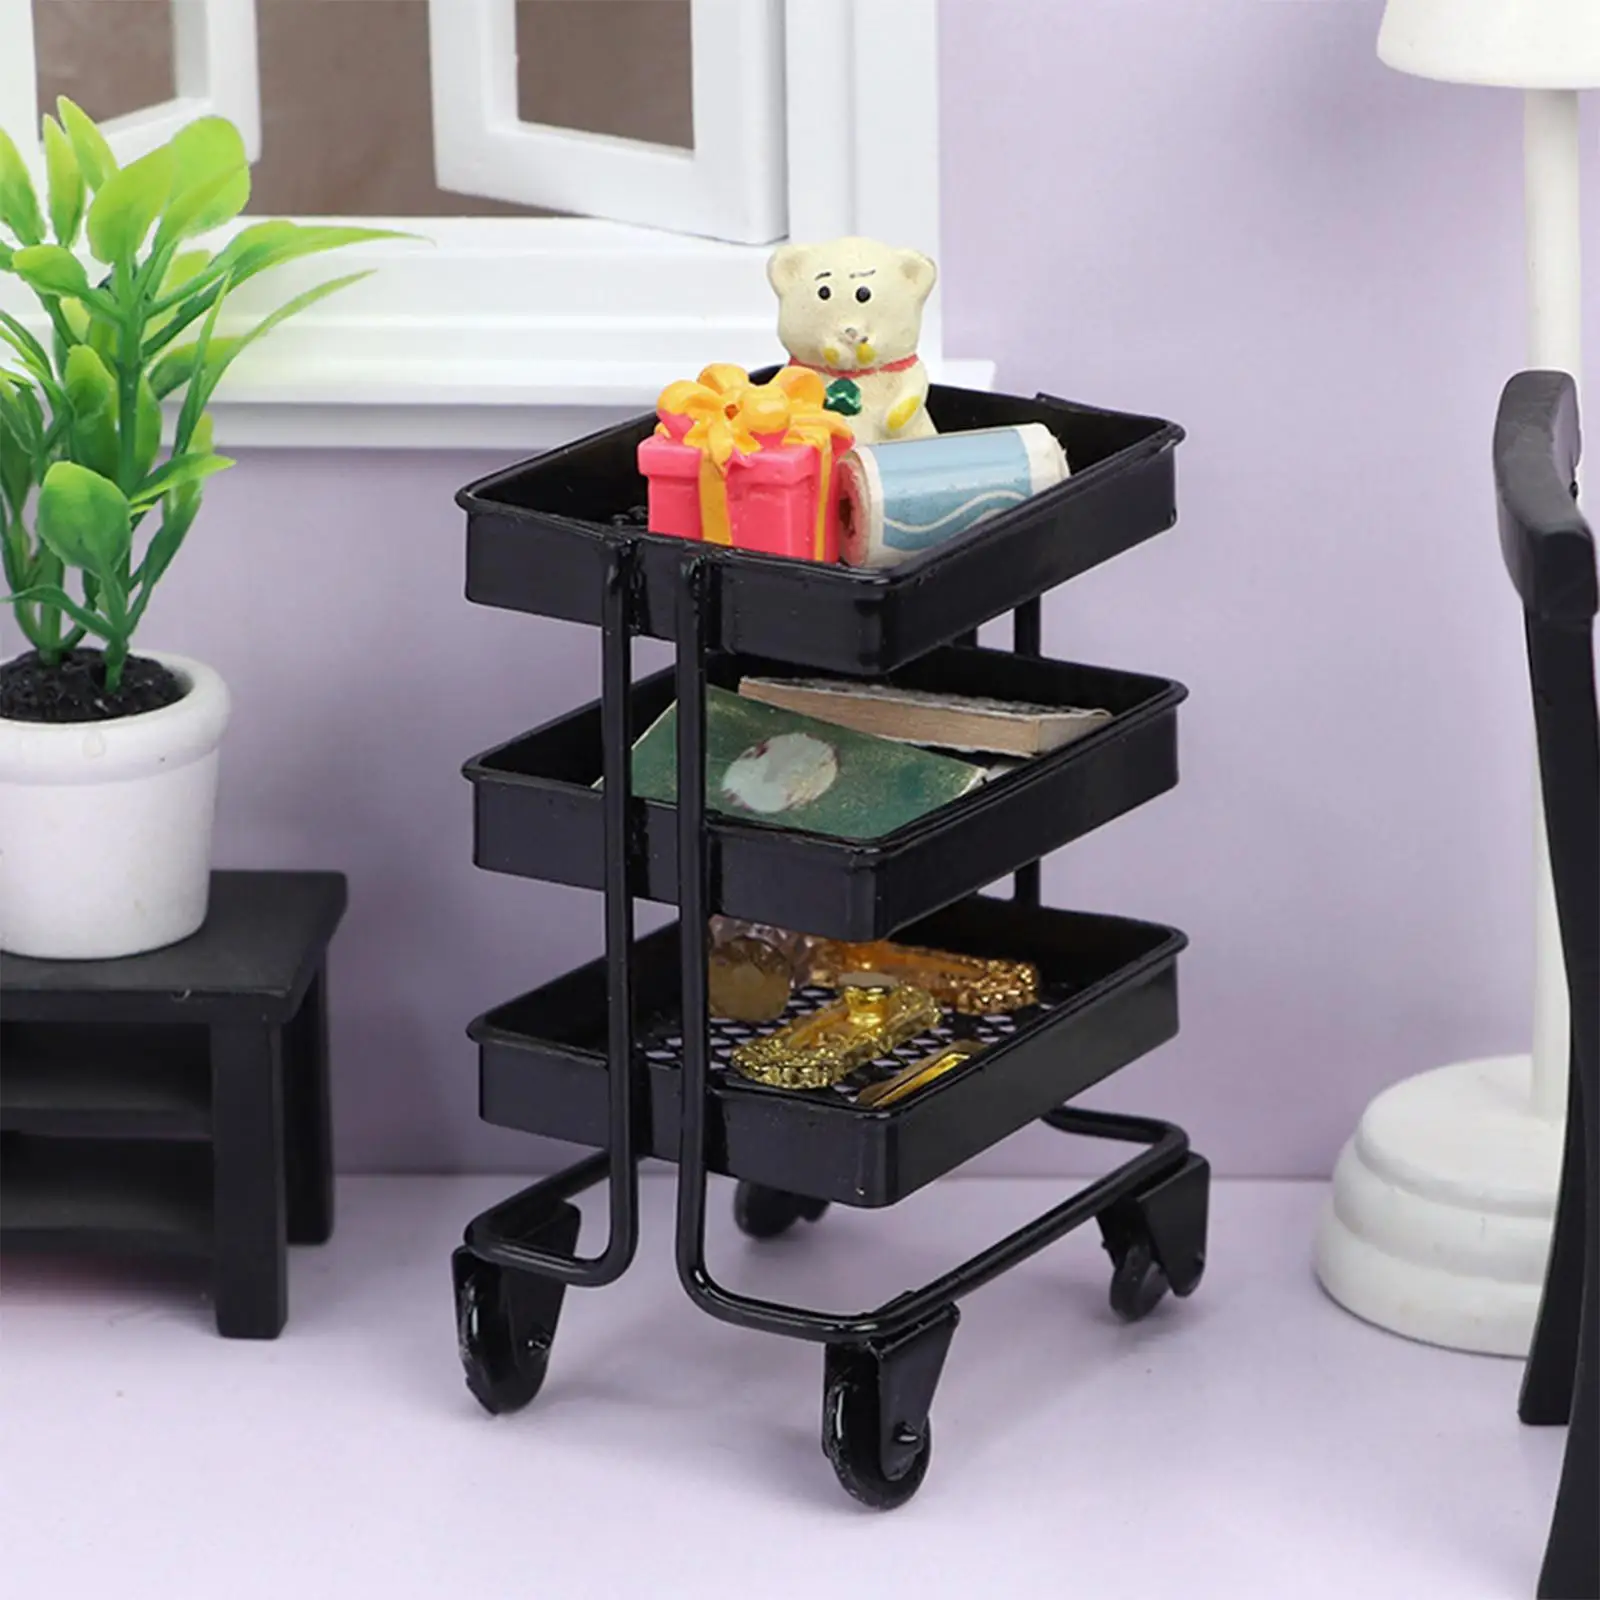 1/12 Dollhouse 3 Tier Miniature Rolling Cart Storage with Wheels Decoration